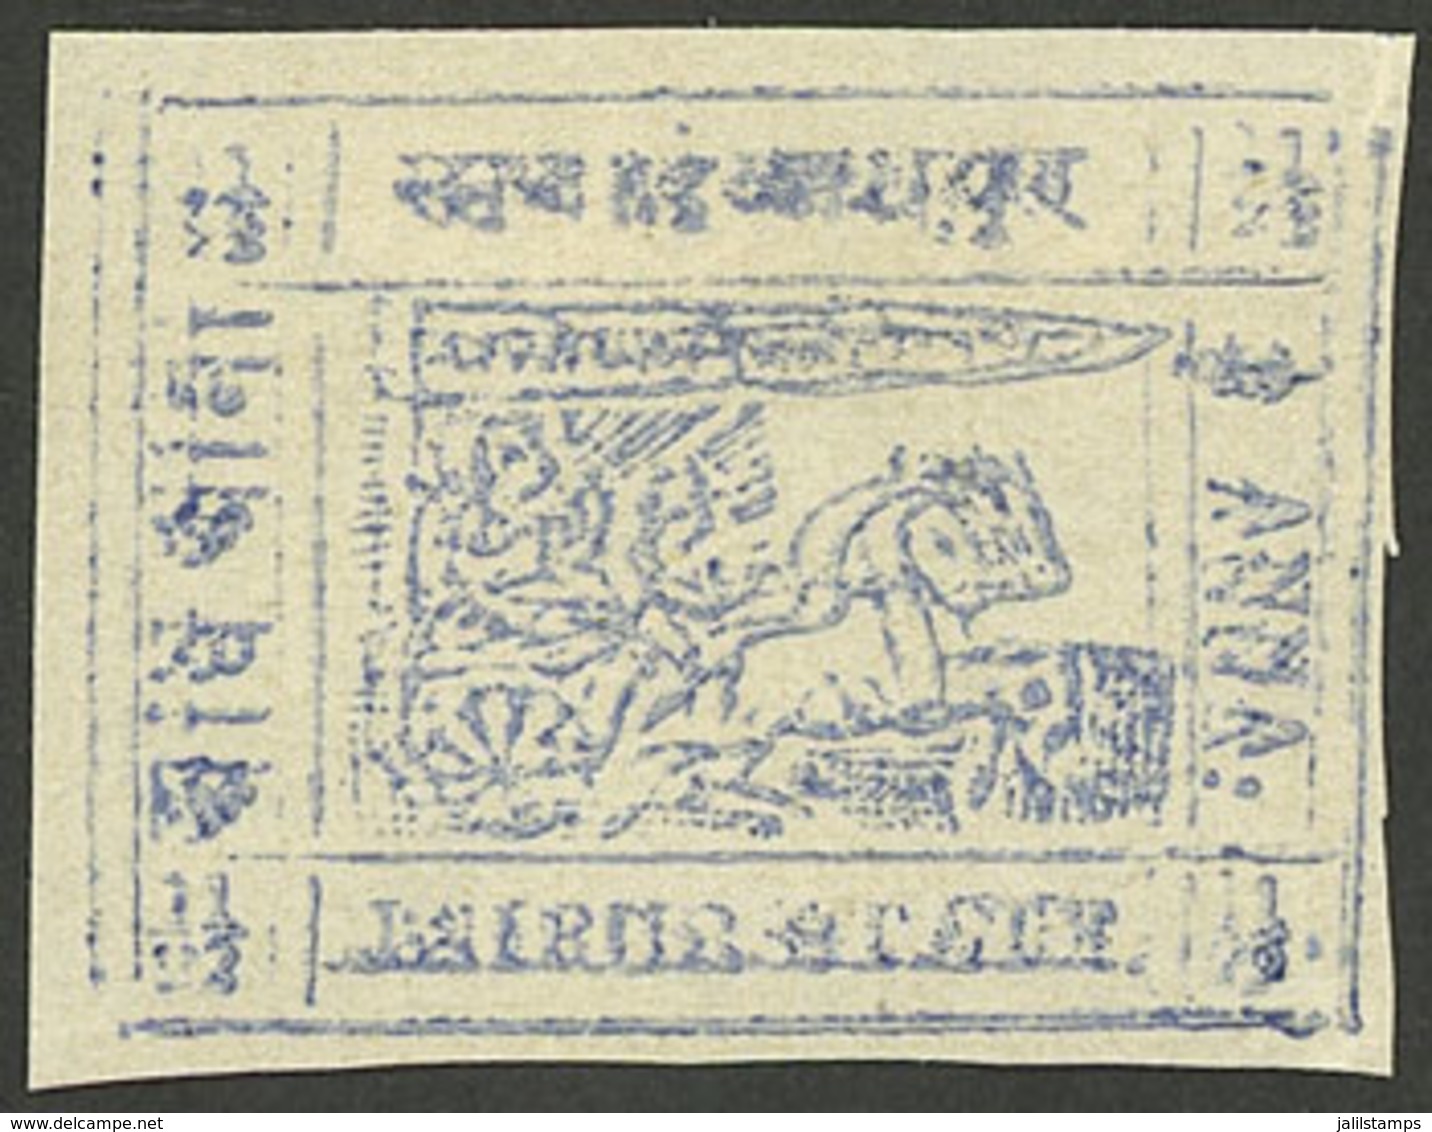 INDIA - JAIPUR: Sc.13, 1911 ½a. Ultramarine, COMPLETE DOUBLE IMPRESSION Variety, VF Quality - Jaipur